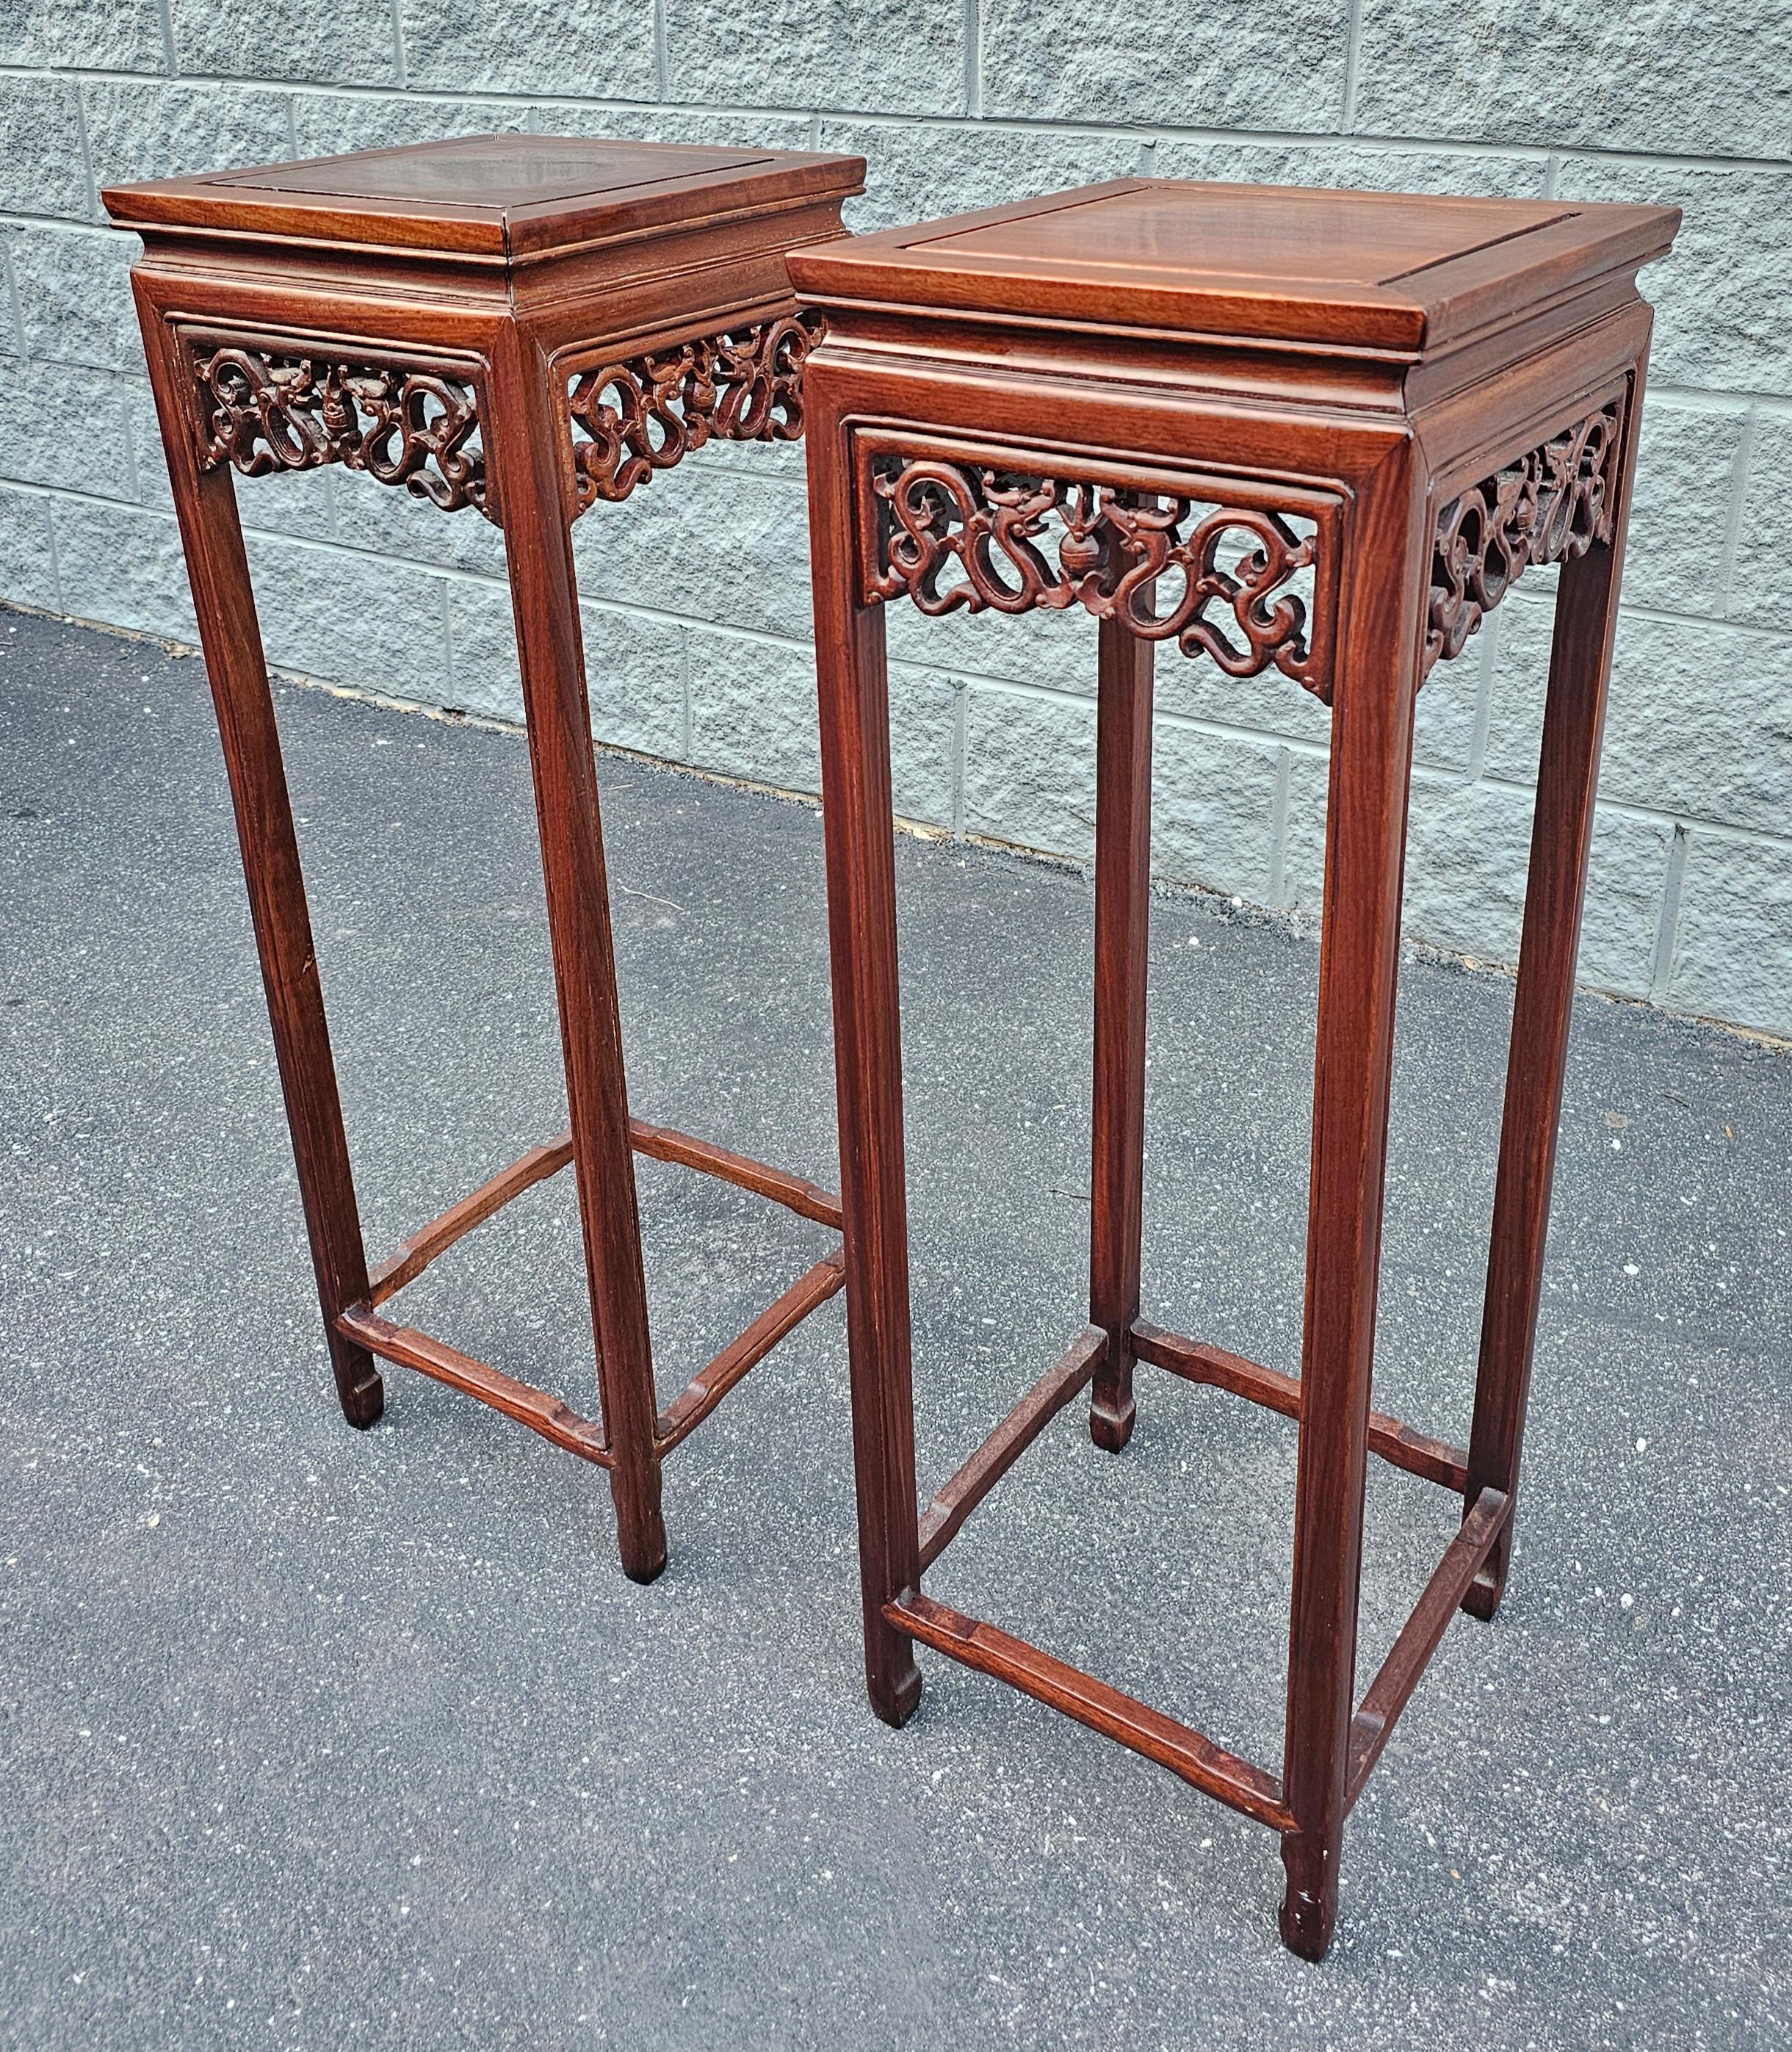 A Stunning slender Pair of mid 20th century Chinese Hongmu Stands Pedestals / Plant Stands.  Measures 12.5